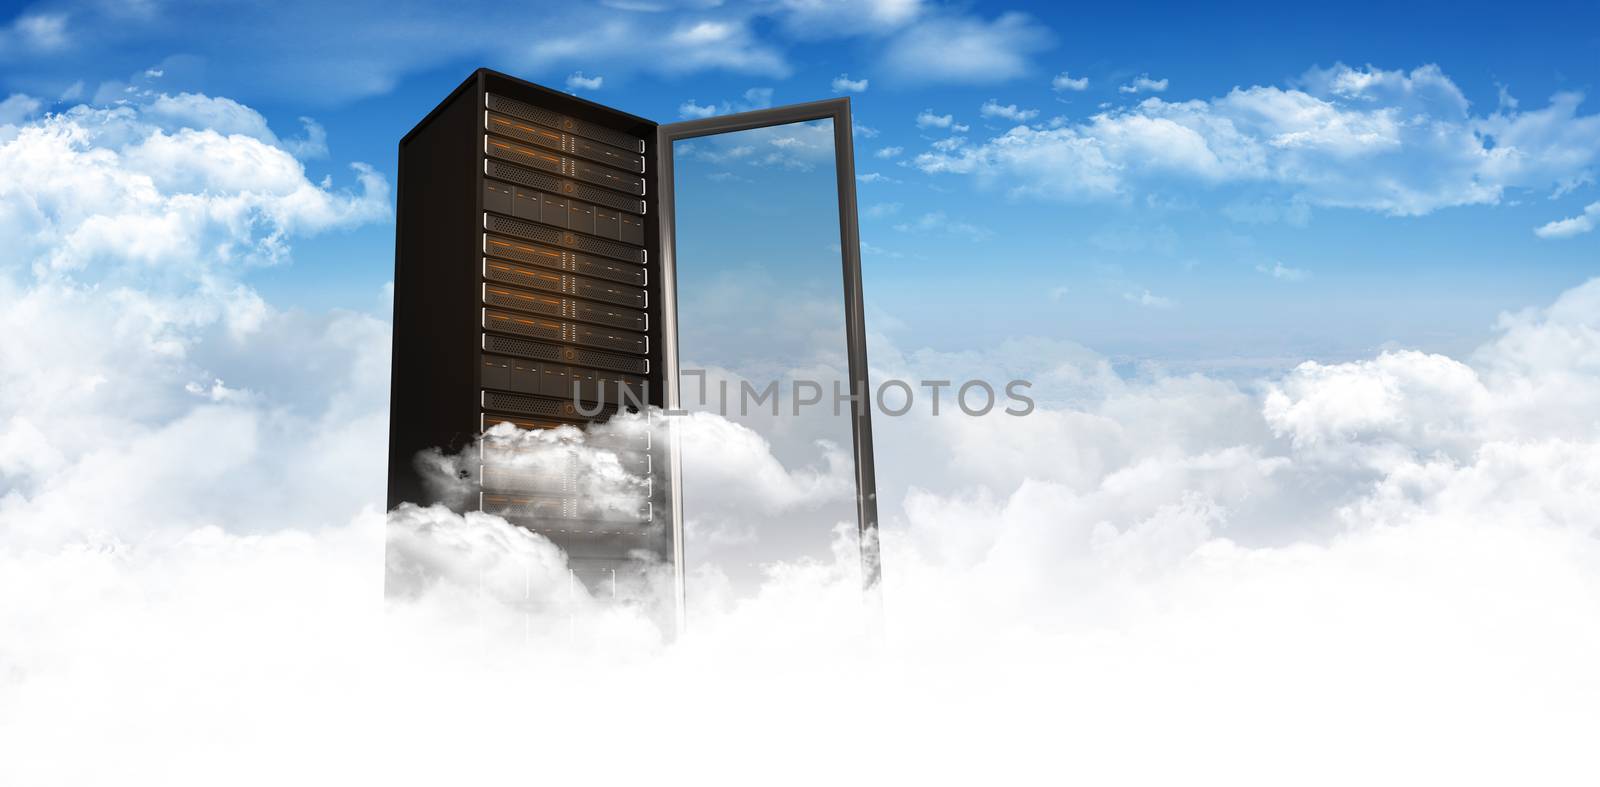 Server Tower against bright blue sky with clouds